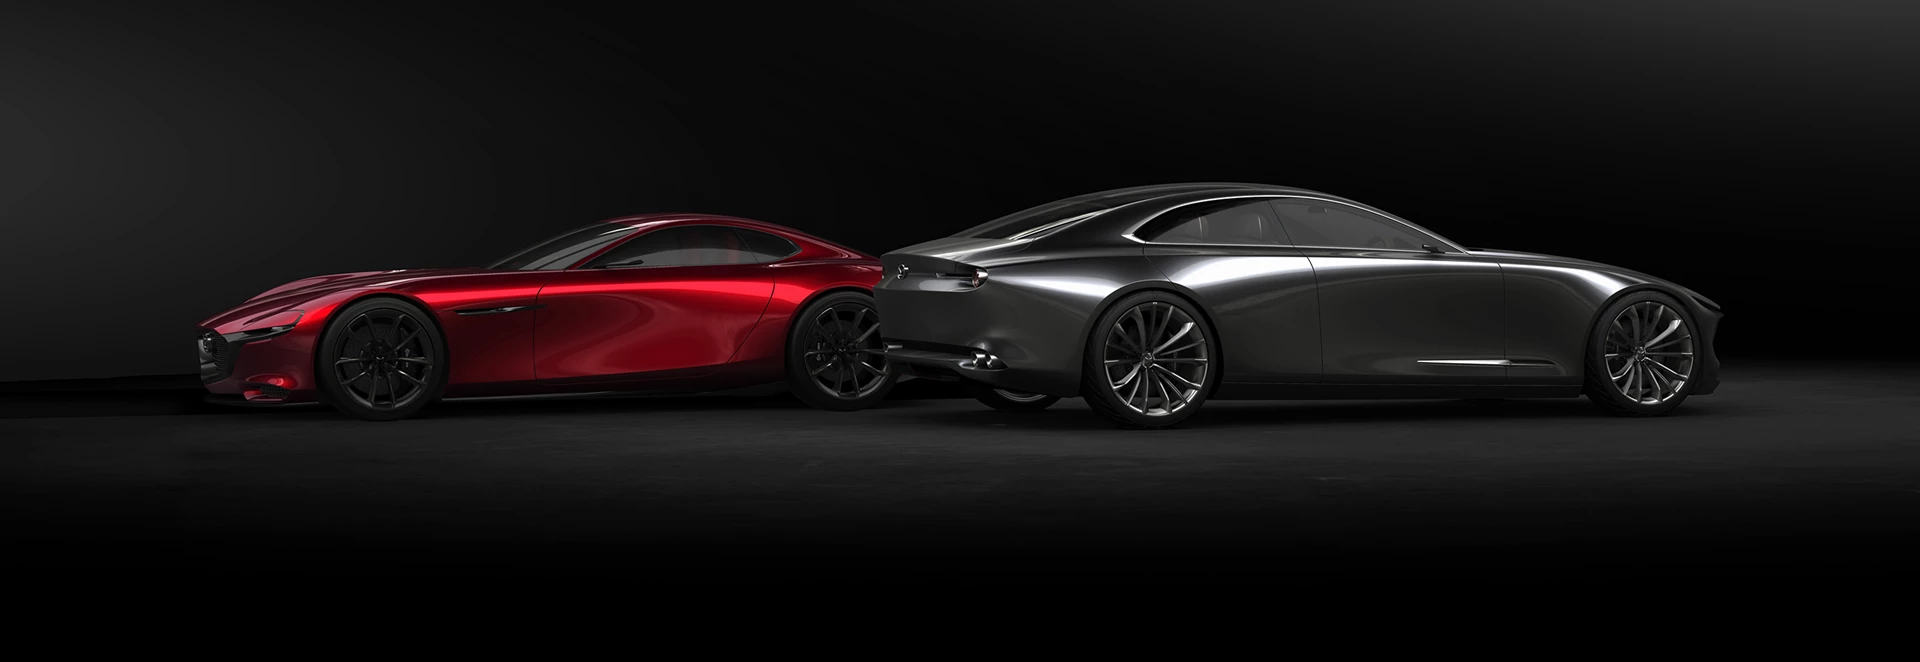 Mazda unveils new concepts in Tokyo Motor Show 2017 